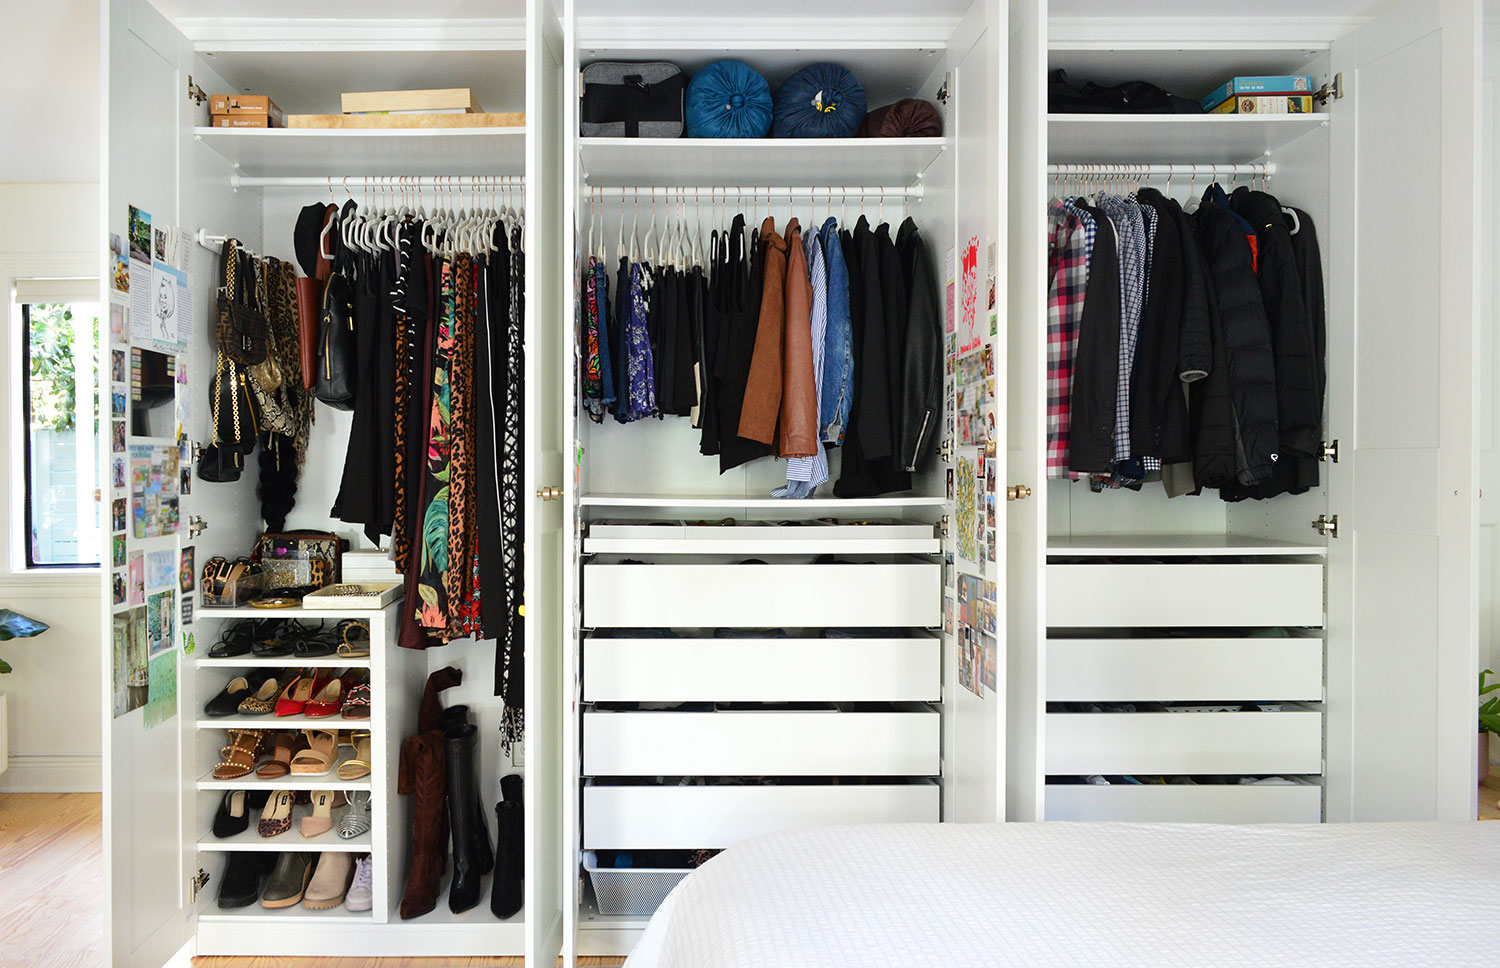 How We Organized Our Closets: Suggestions & A Video Tour